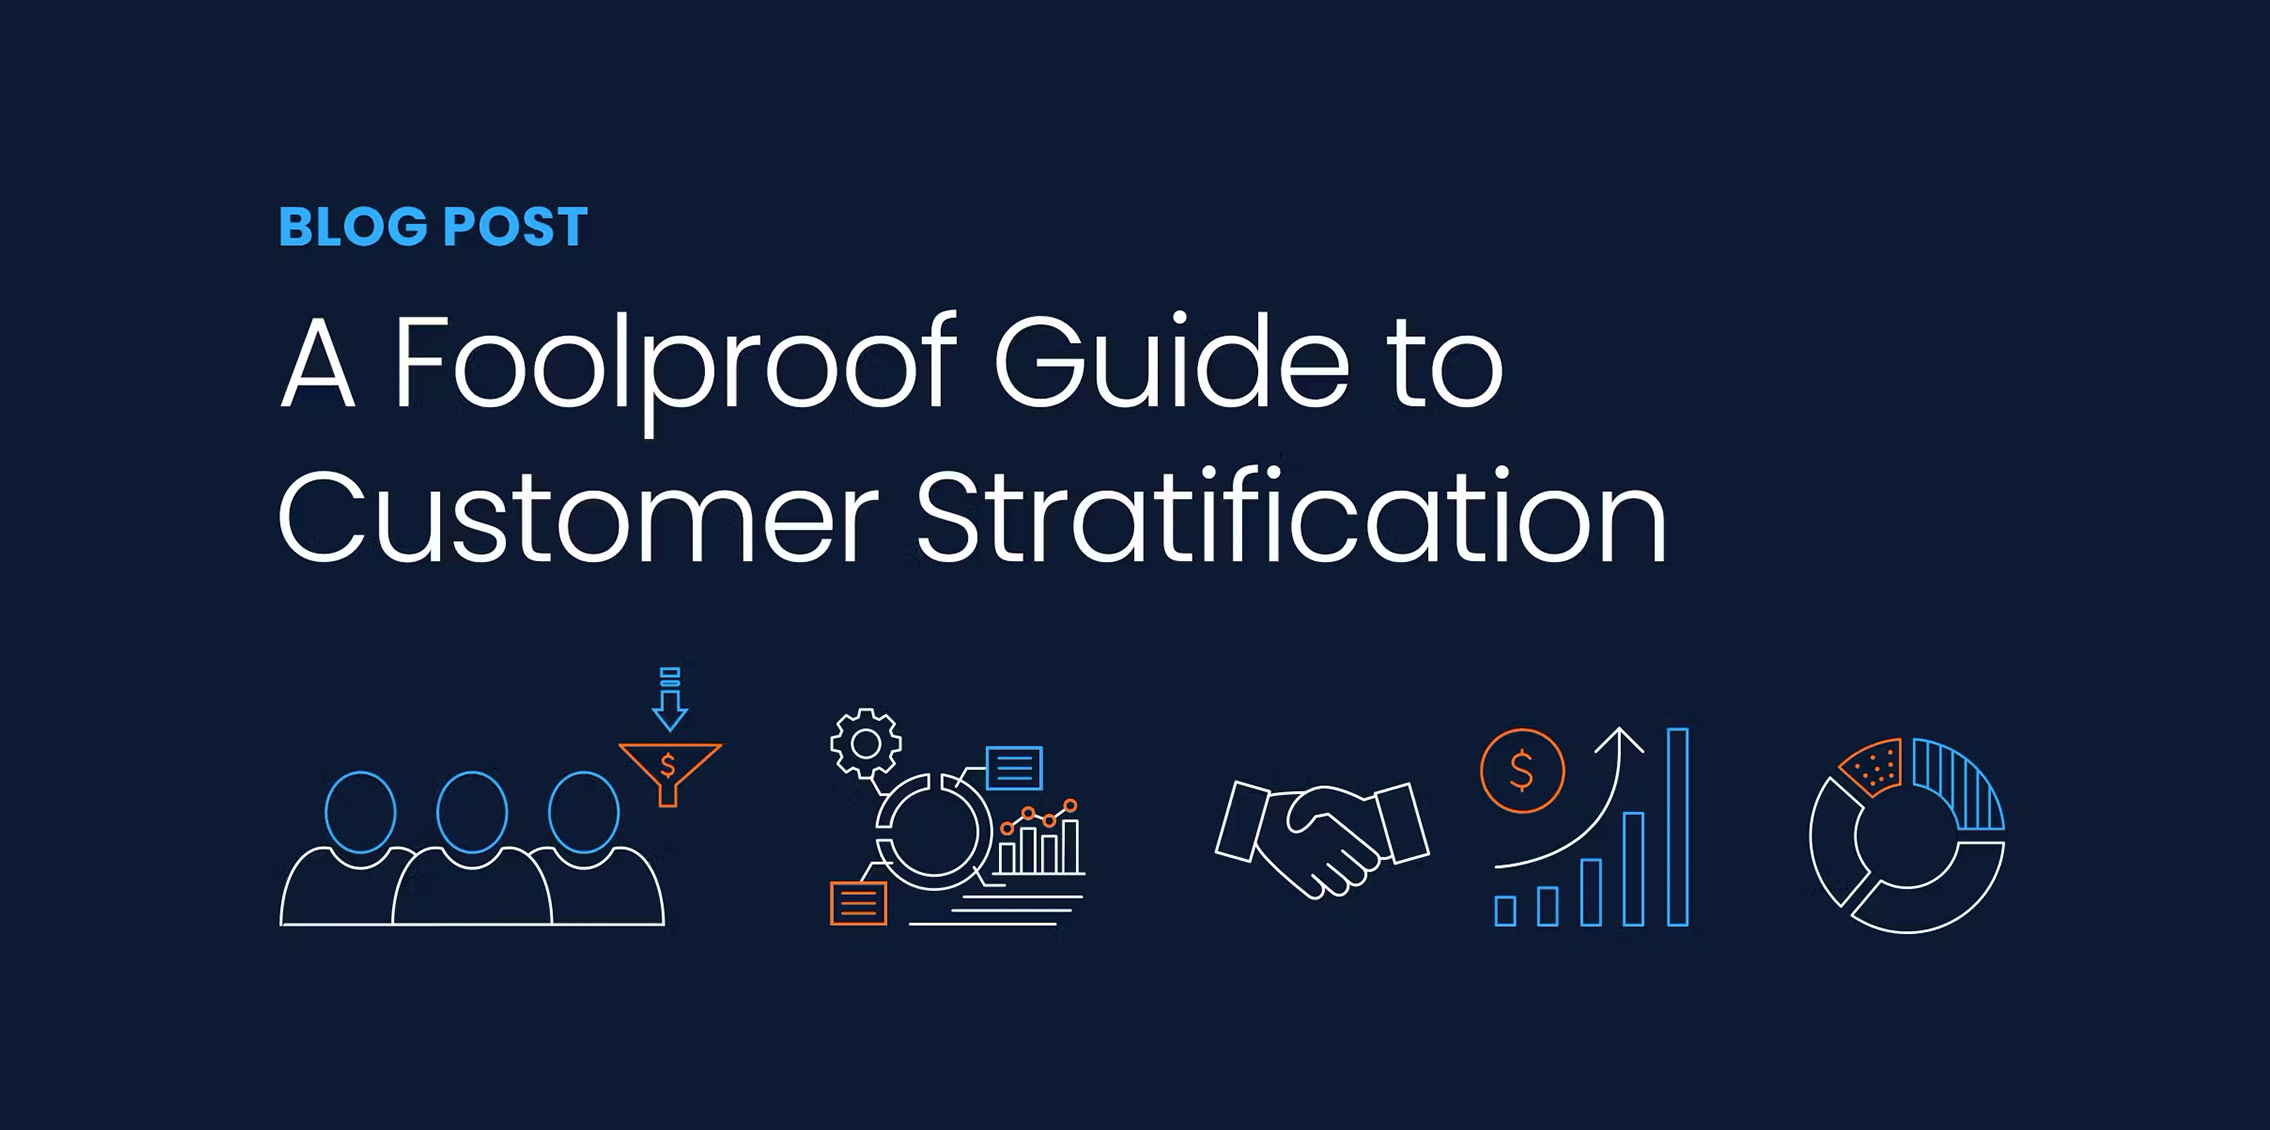 A foolproof Guide to Customer Stratification